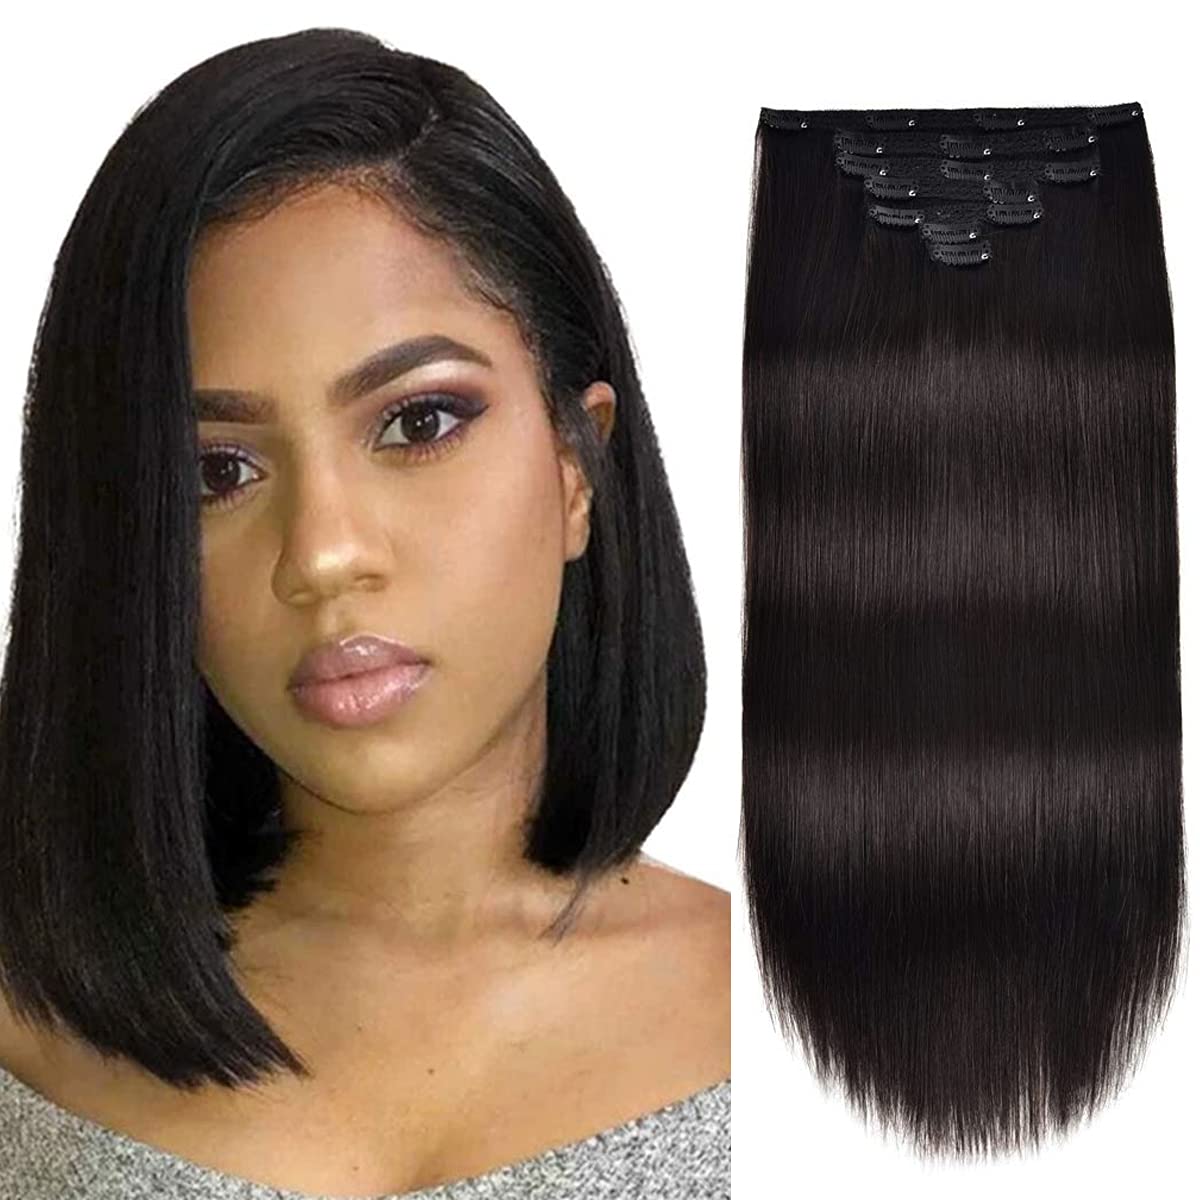 Clip In Extensions Human Hair,Double Weft Remy Hair Clip In Extensions 70g  7pcs Silky Straight